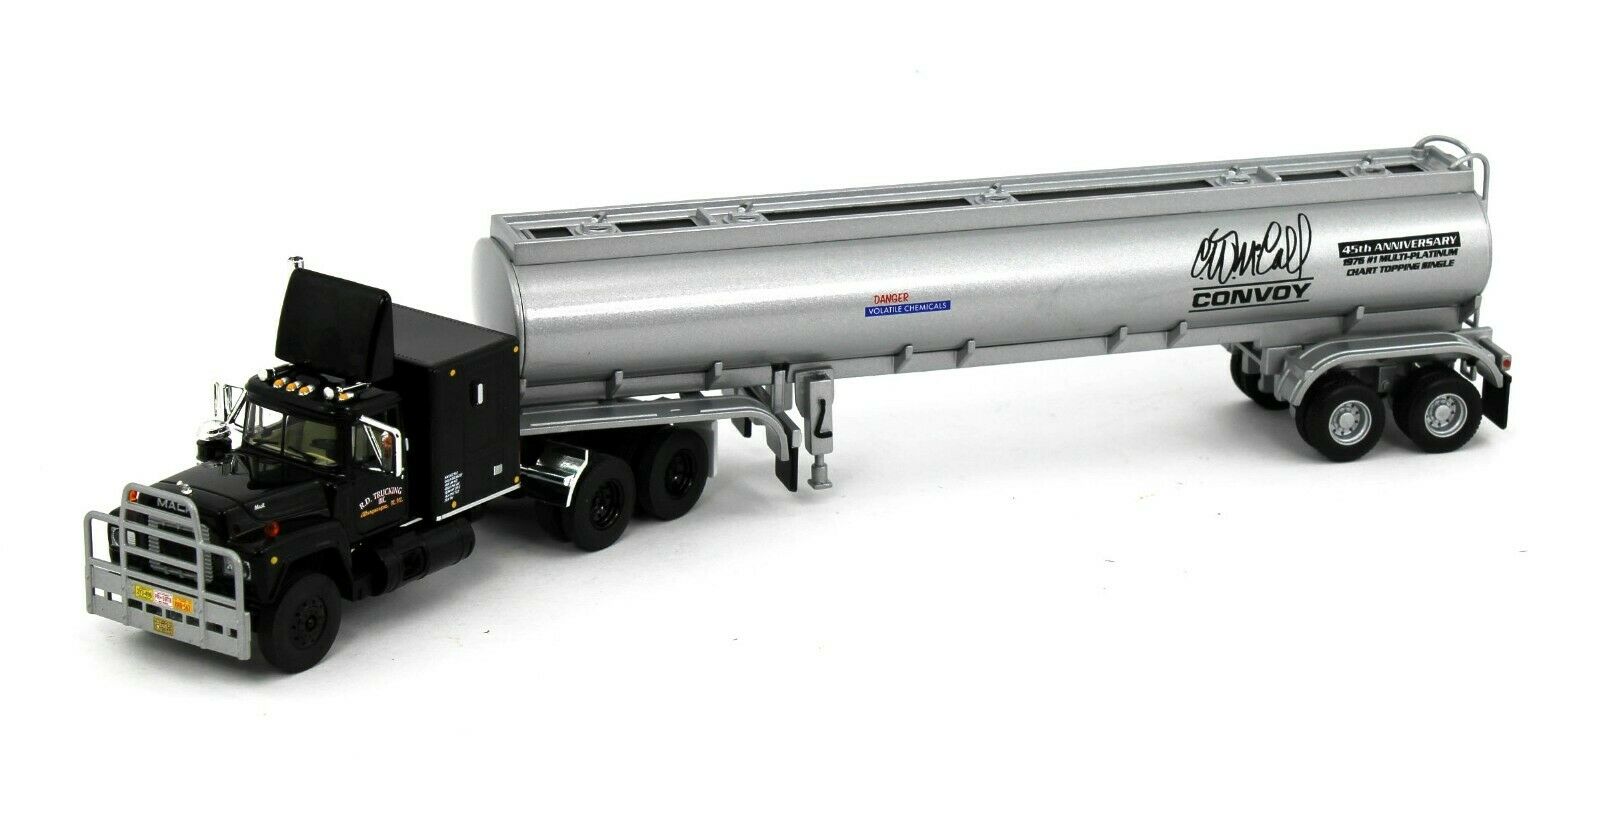 CONVOY RUBBER DUCK Mack R Model R.D Trucking Tractor and Tanker Trailer Toy  Truck Replica